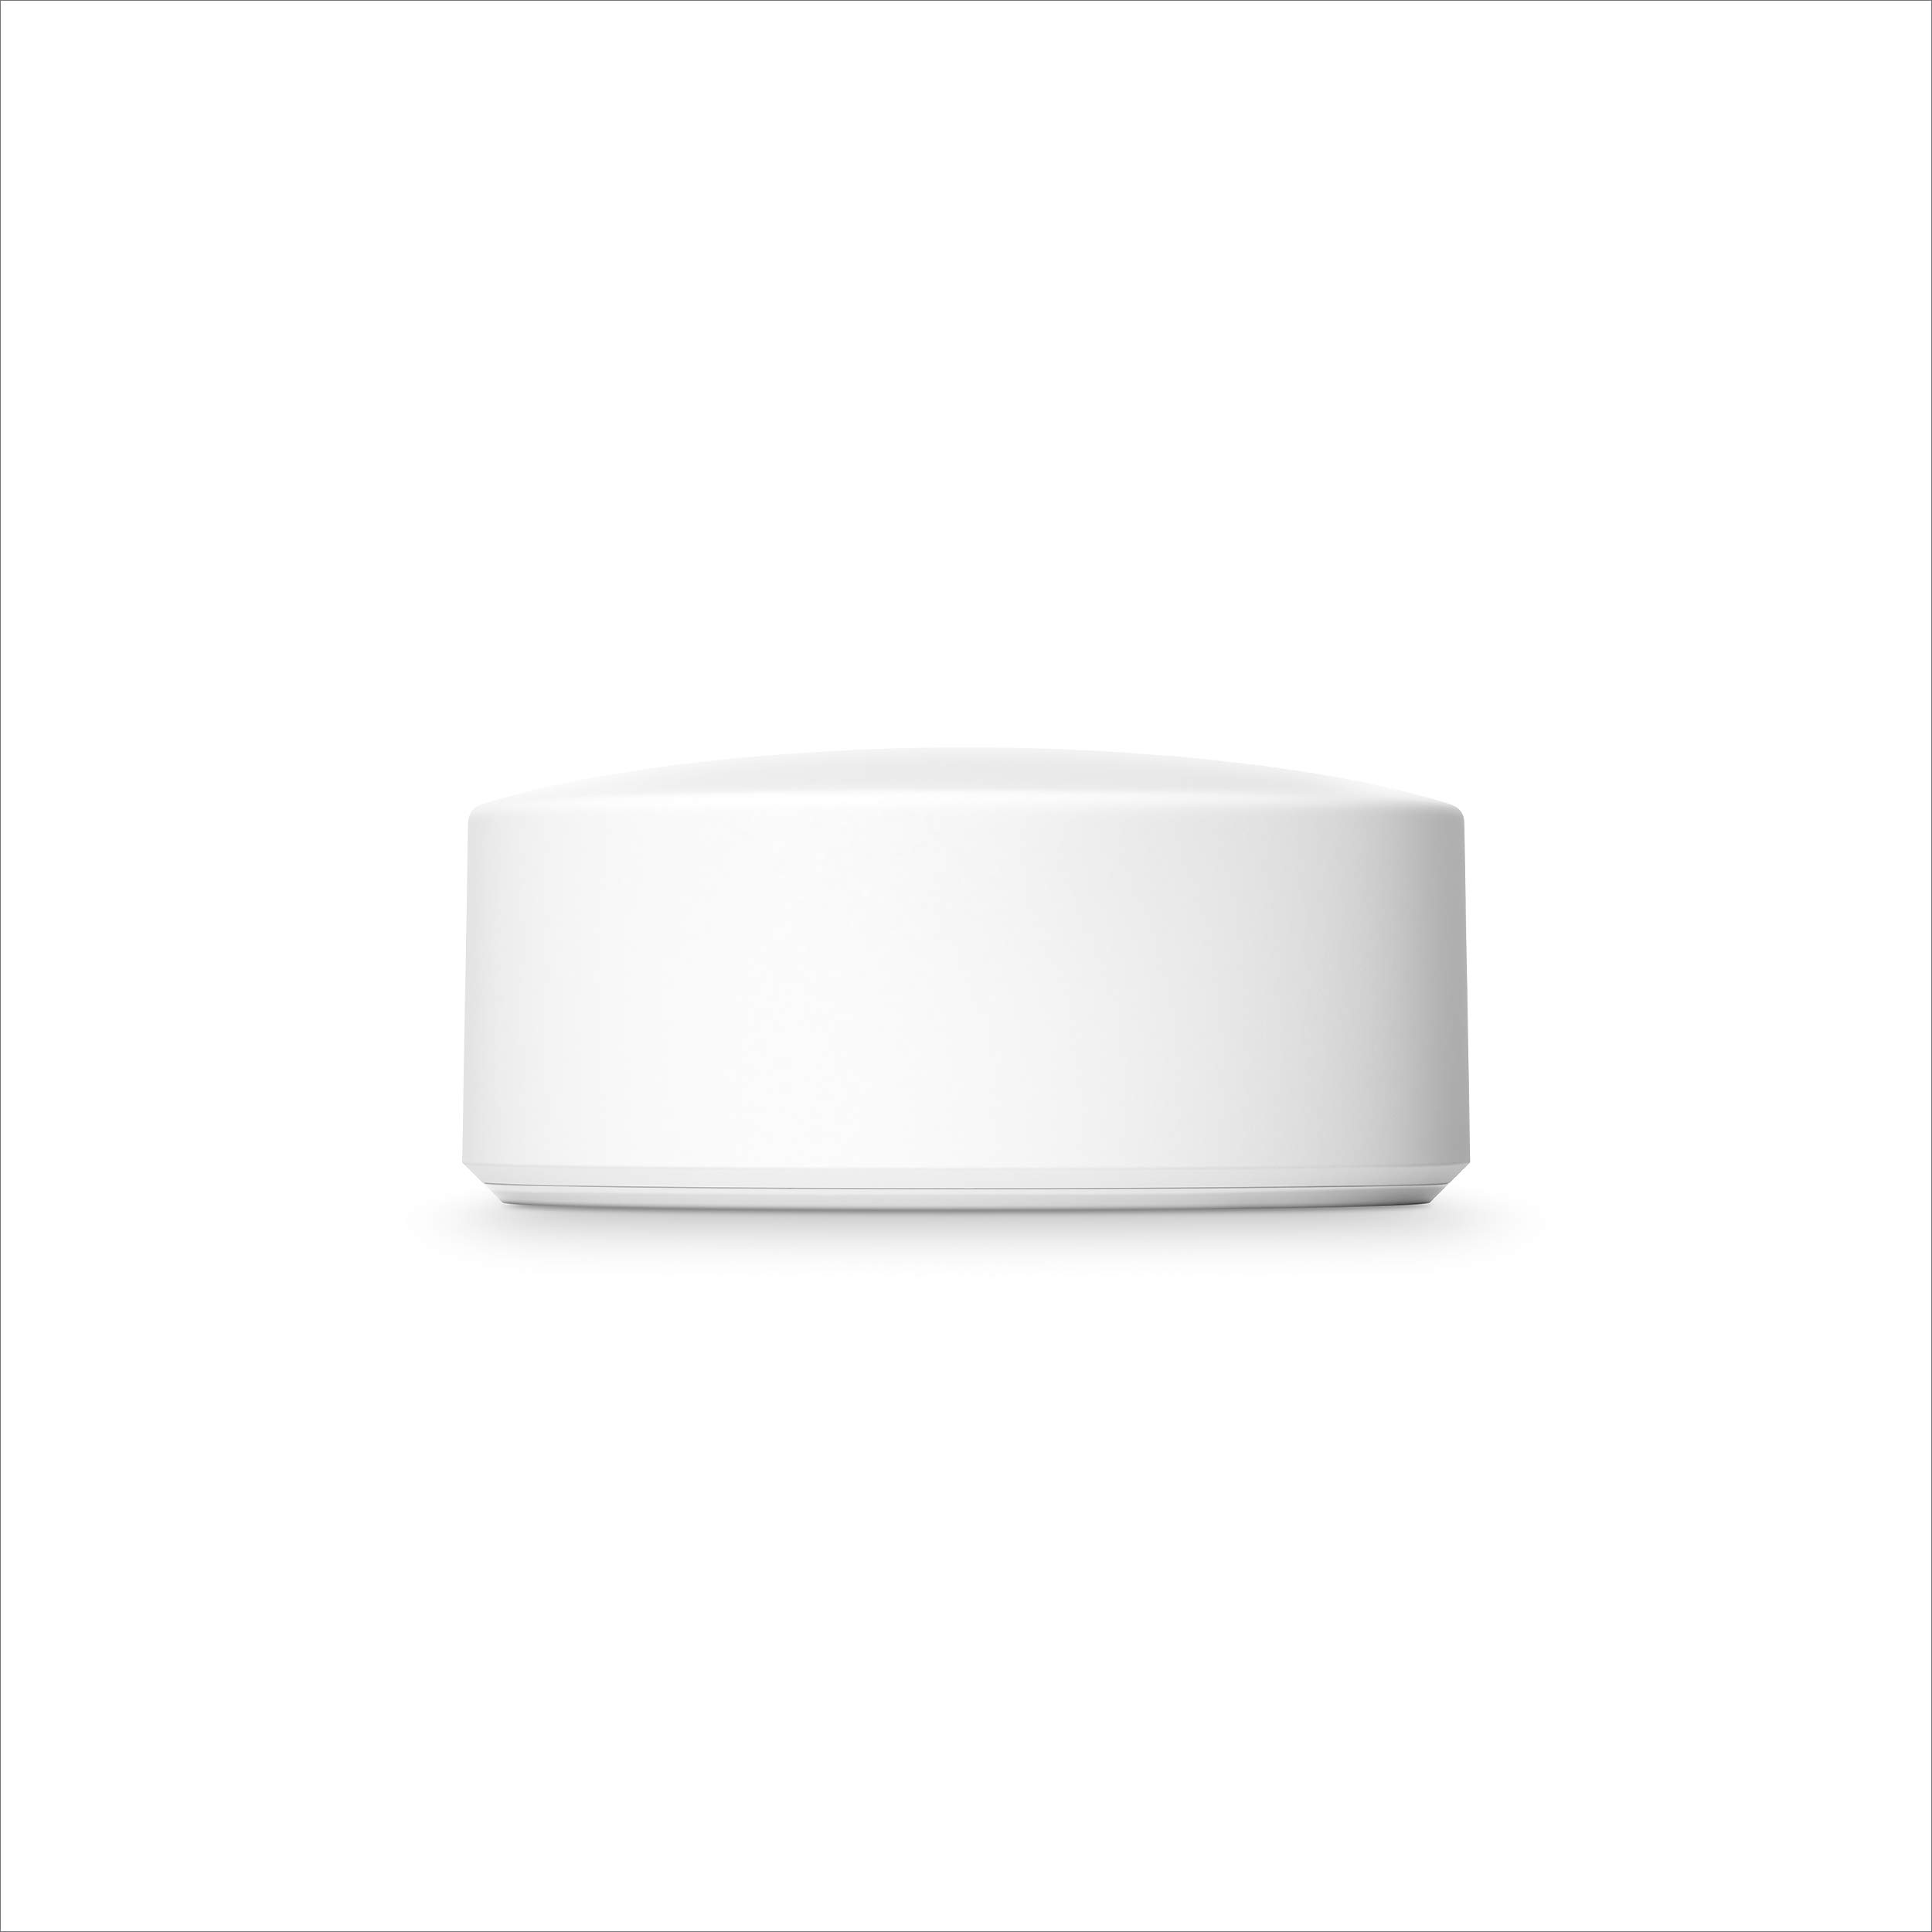 Google Nest Temperature Sensor- That Works with Nest Learning Thermostat and Nest Thermostat E - Smart Home